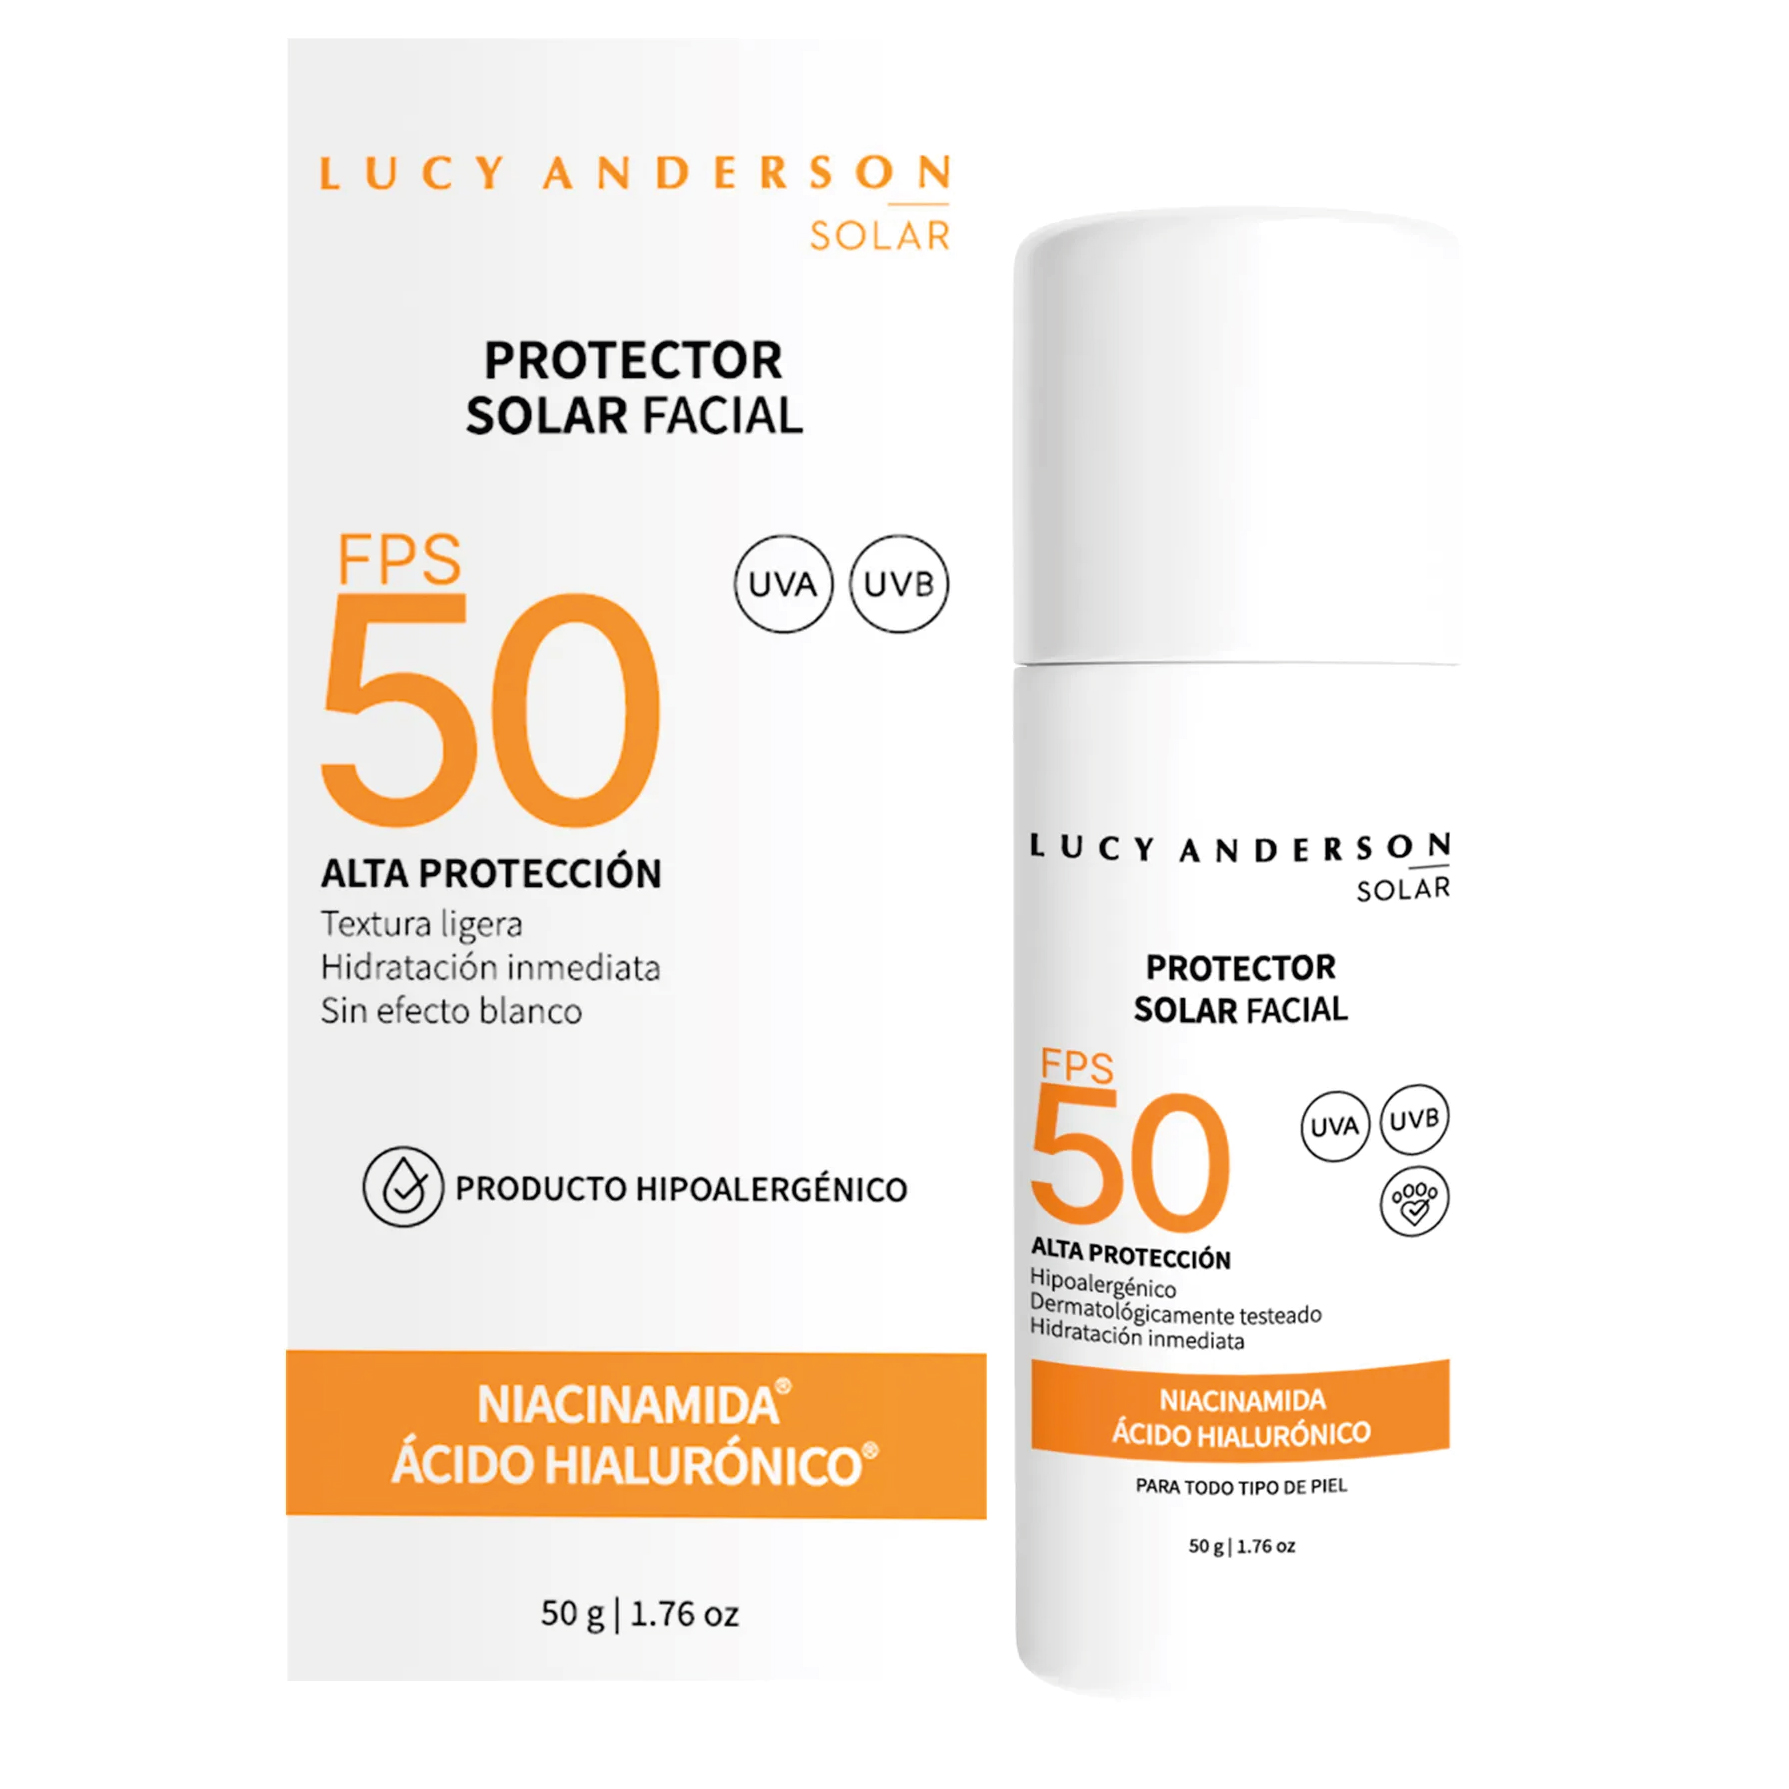 LUCY ANDERSON PROTECTOR SOLAR FACIAL FPS 50 X 50 G.